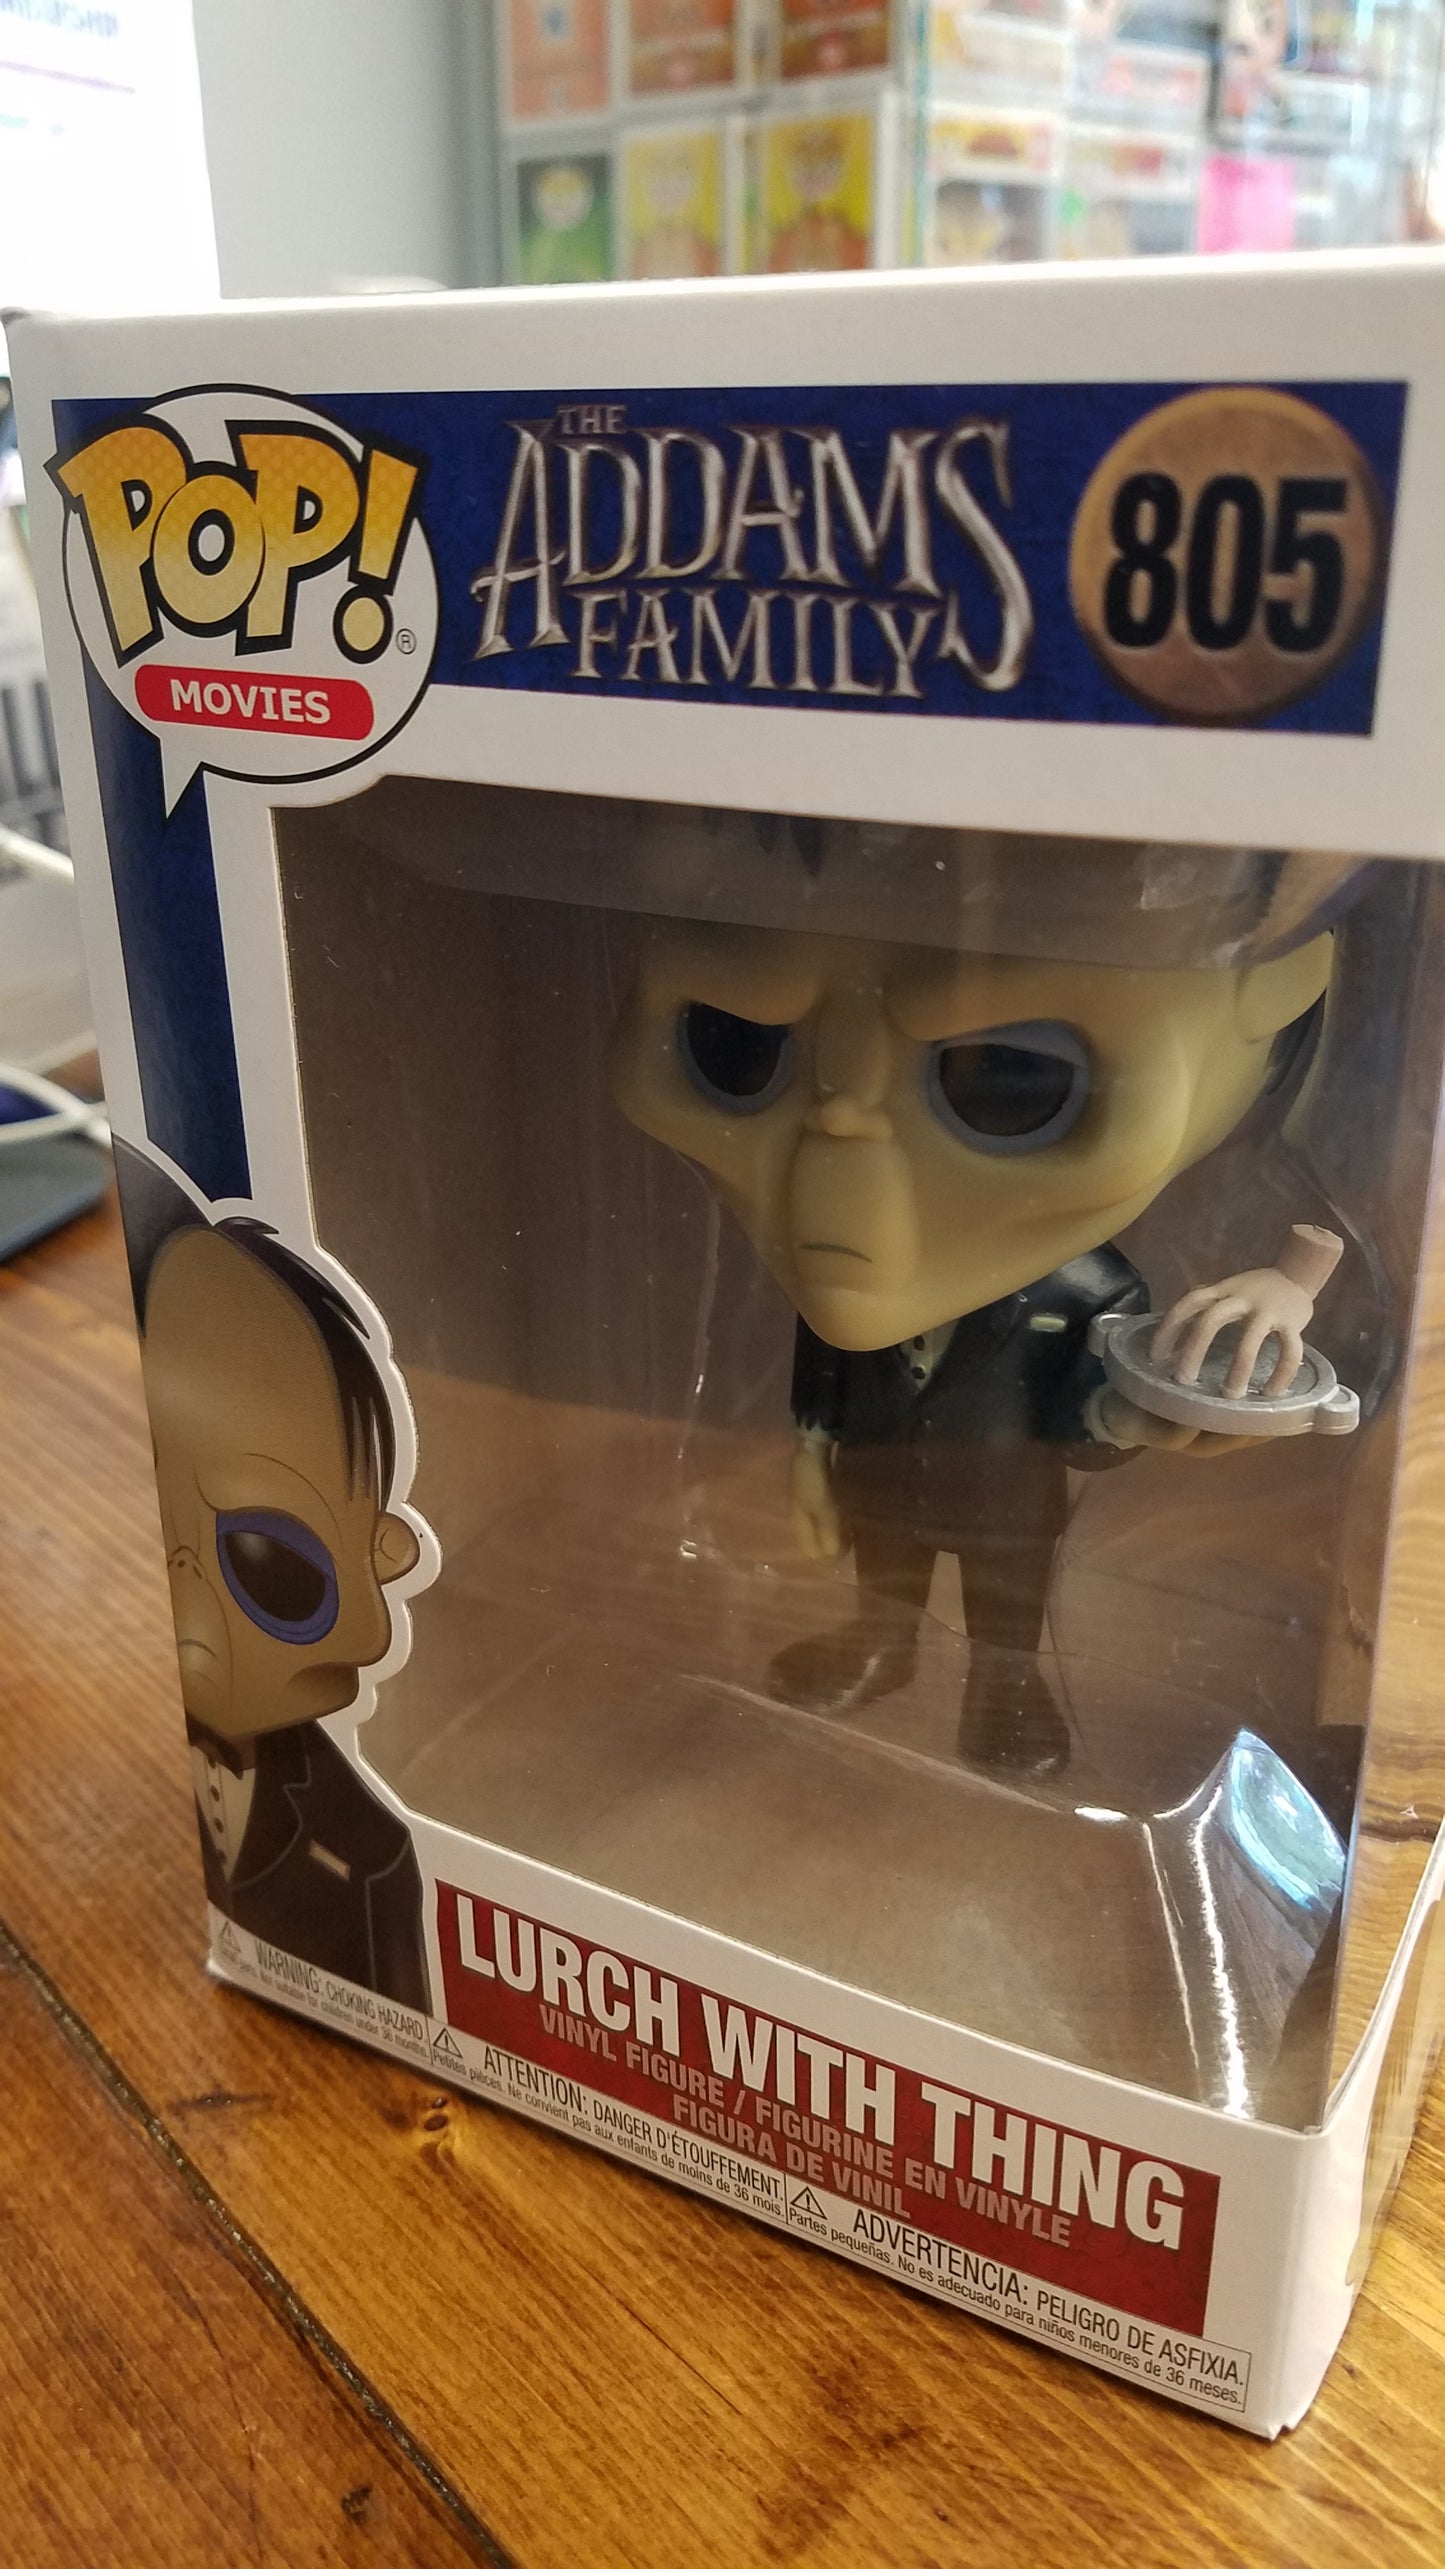 Addams Family Lurch with Thing Funko Pop! Vinyl figure television